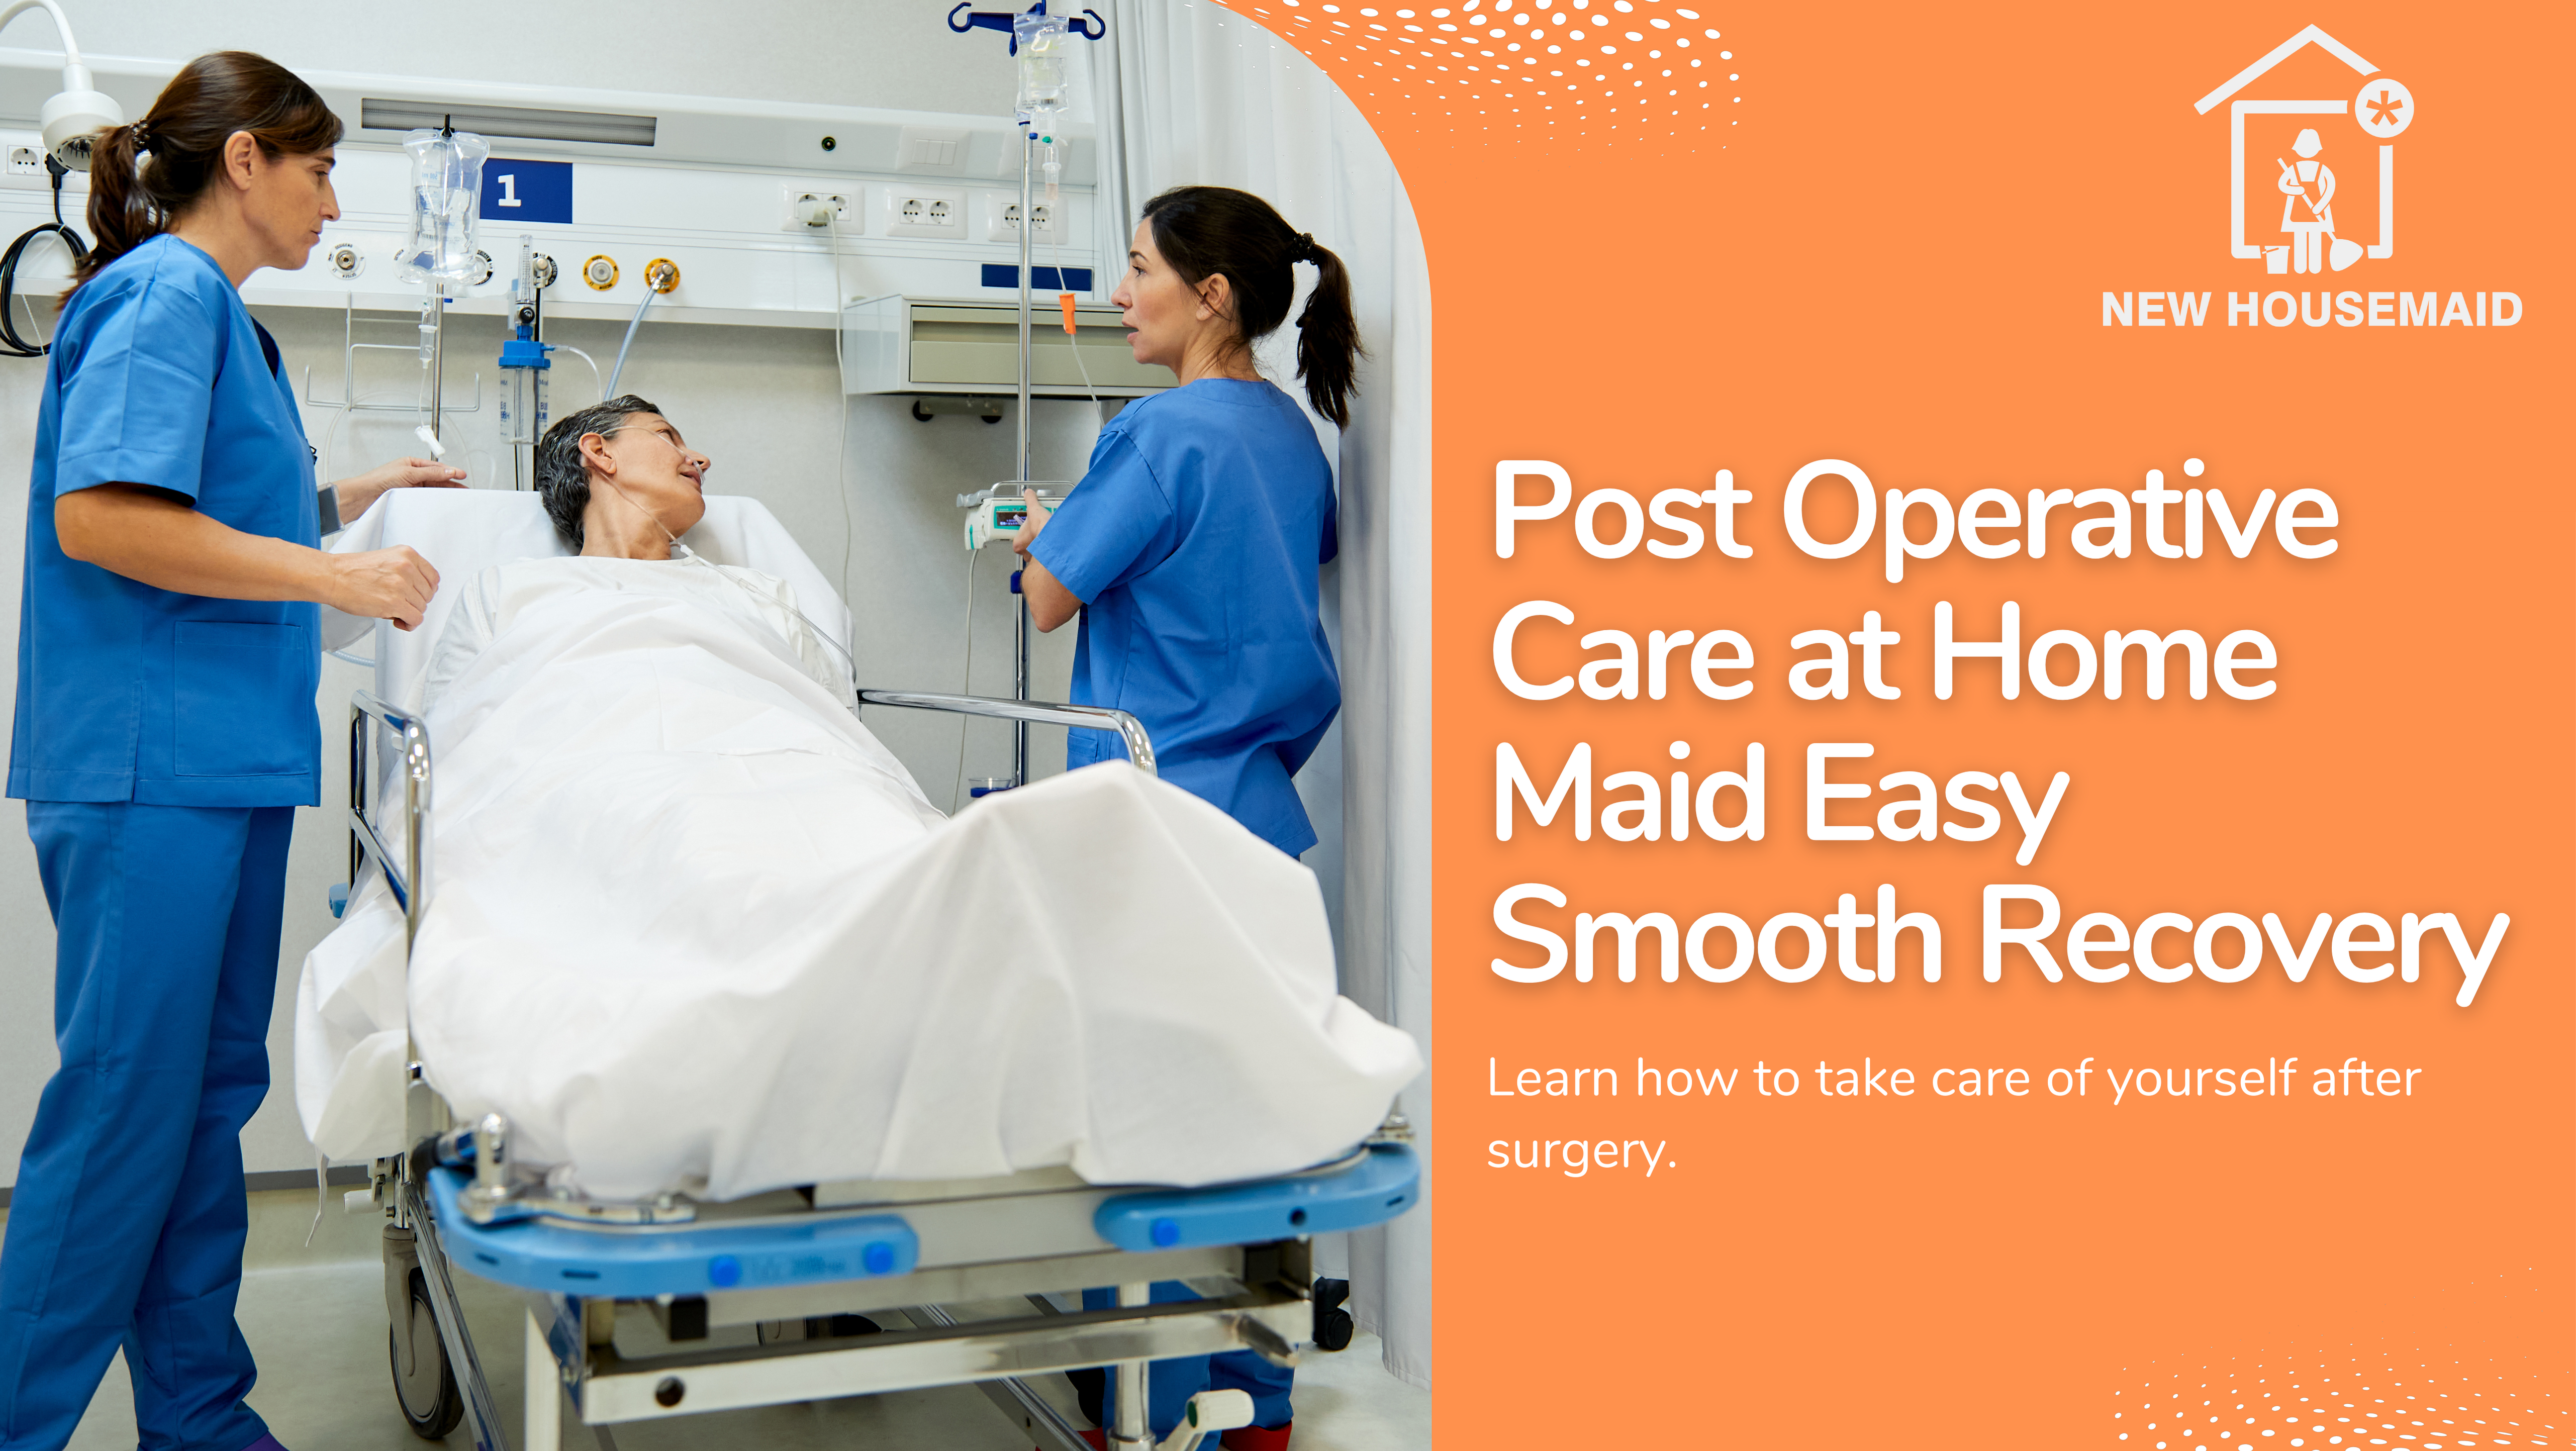 post operative care at home - newhousemaid.com